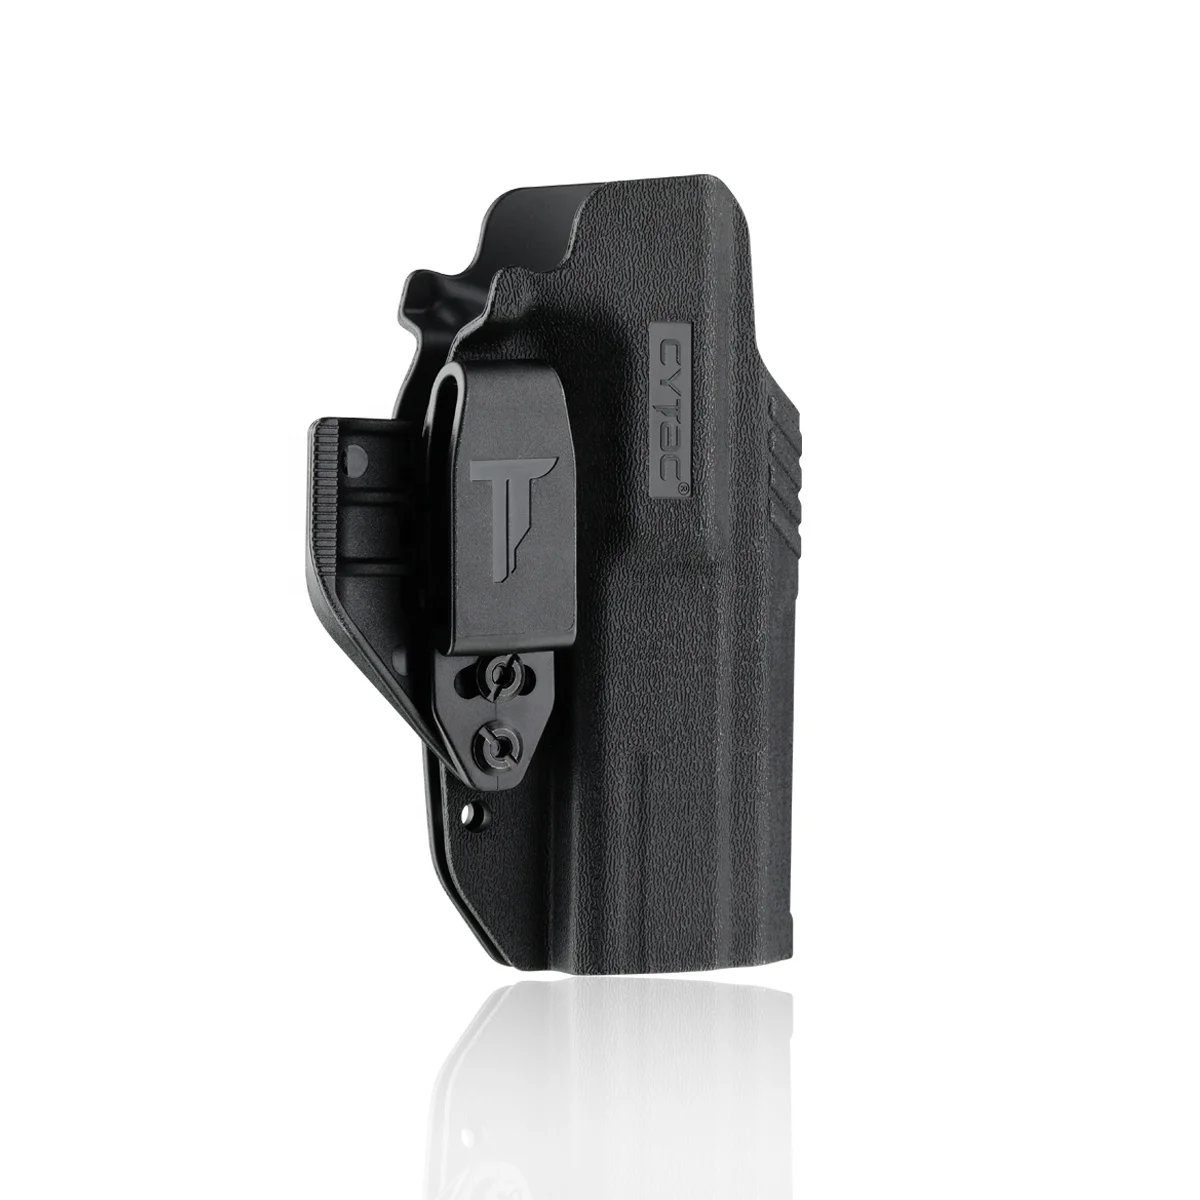 

Cytac IWB Concealed Carry Holster for Taurus PT809 PT840 PT845 Full Size Inside Waistband for Budyguard Use, Black